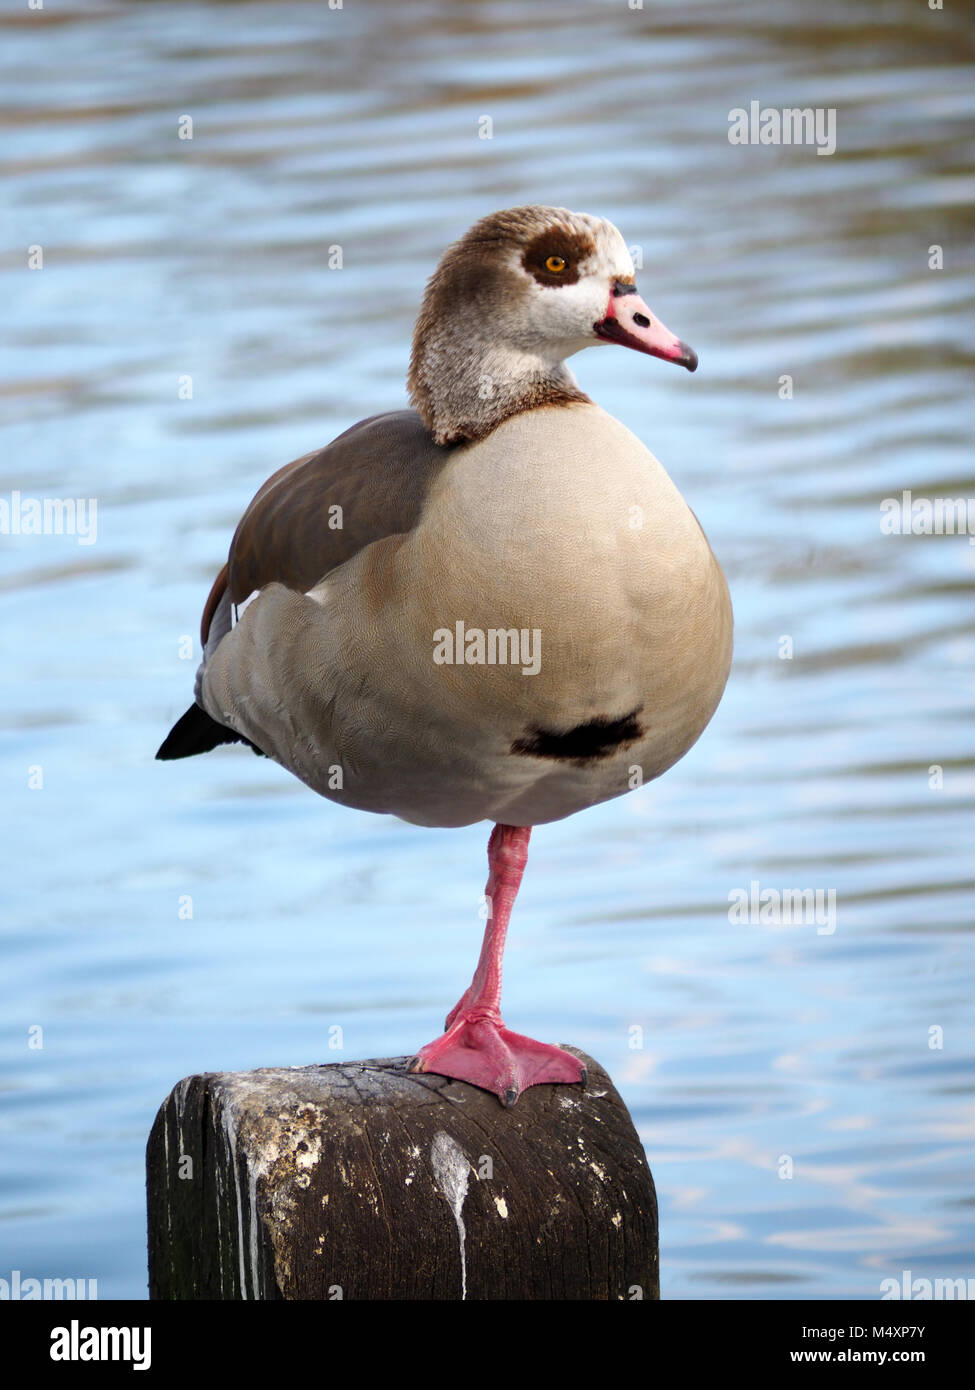 Close-up view of a bird standing on one leg Stock Photo